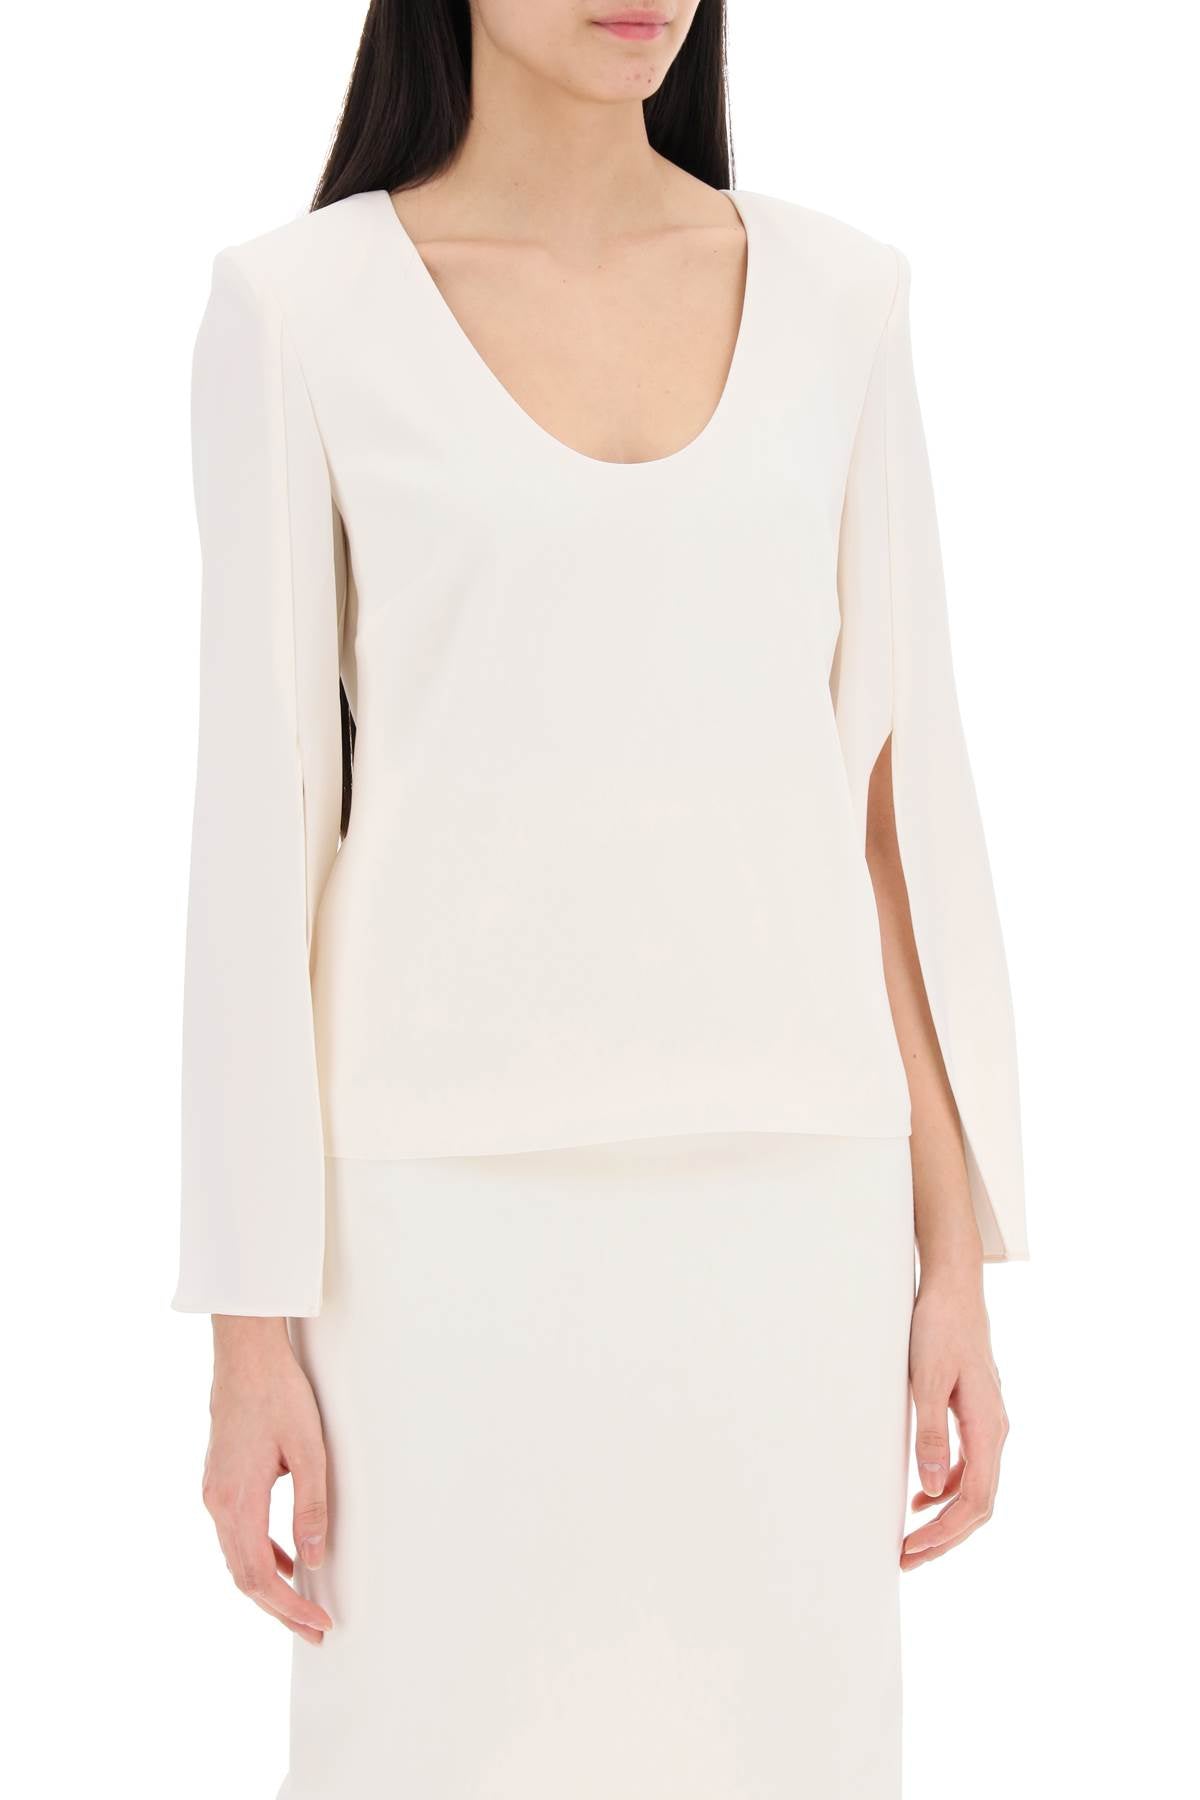 Roland mouret "cady top with flared sleeve"-1